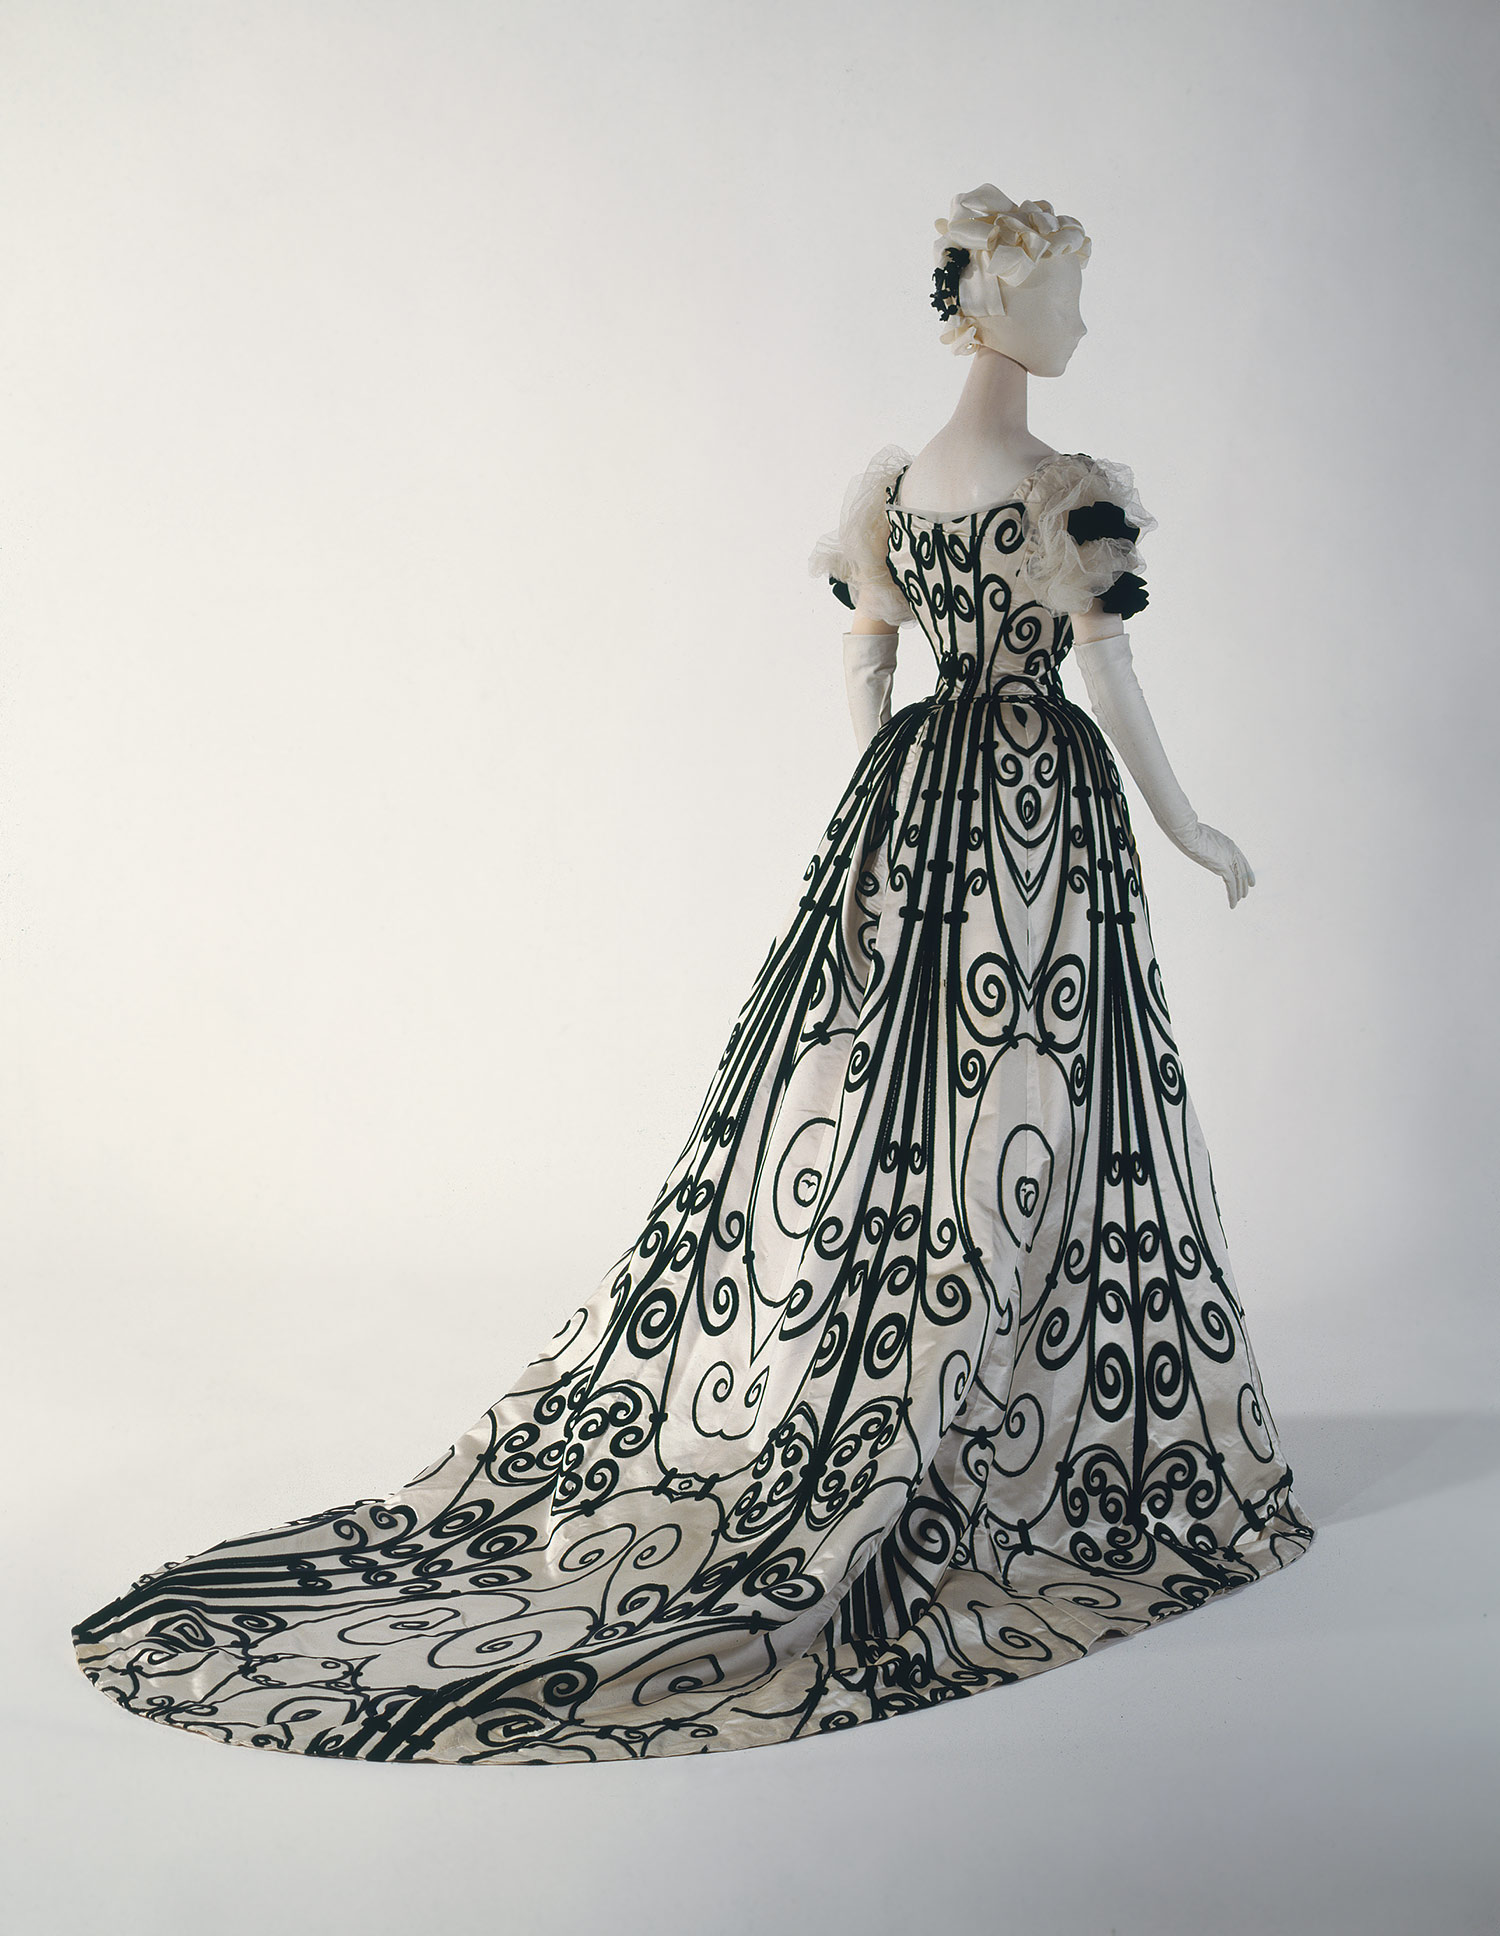 Evening gown created between 1898 and 1900 by the House of Worth (The Costume Institute, Metropolitan Museum of Art)